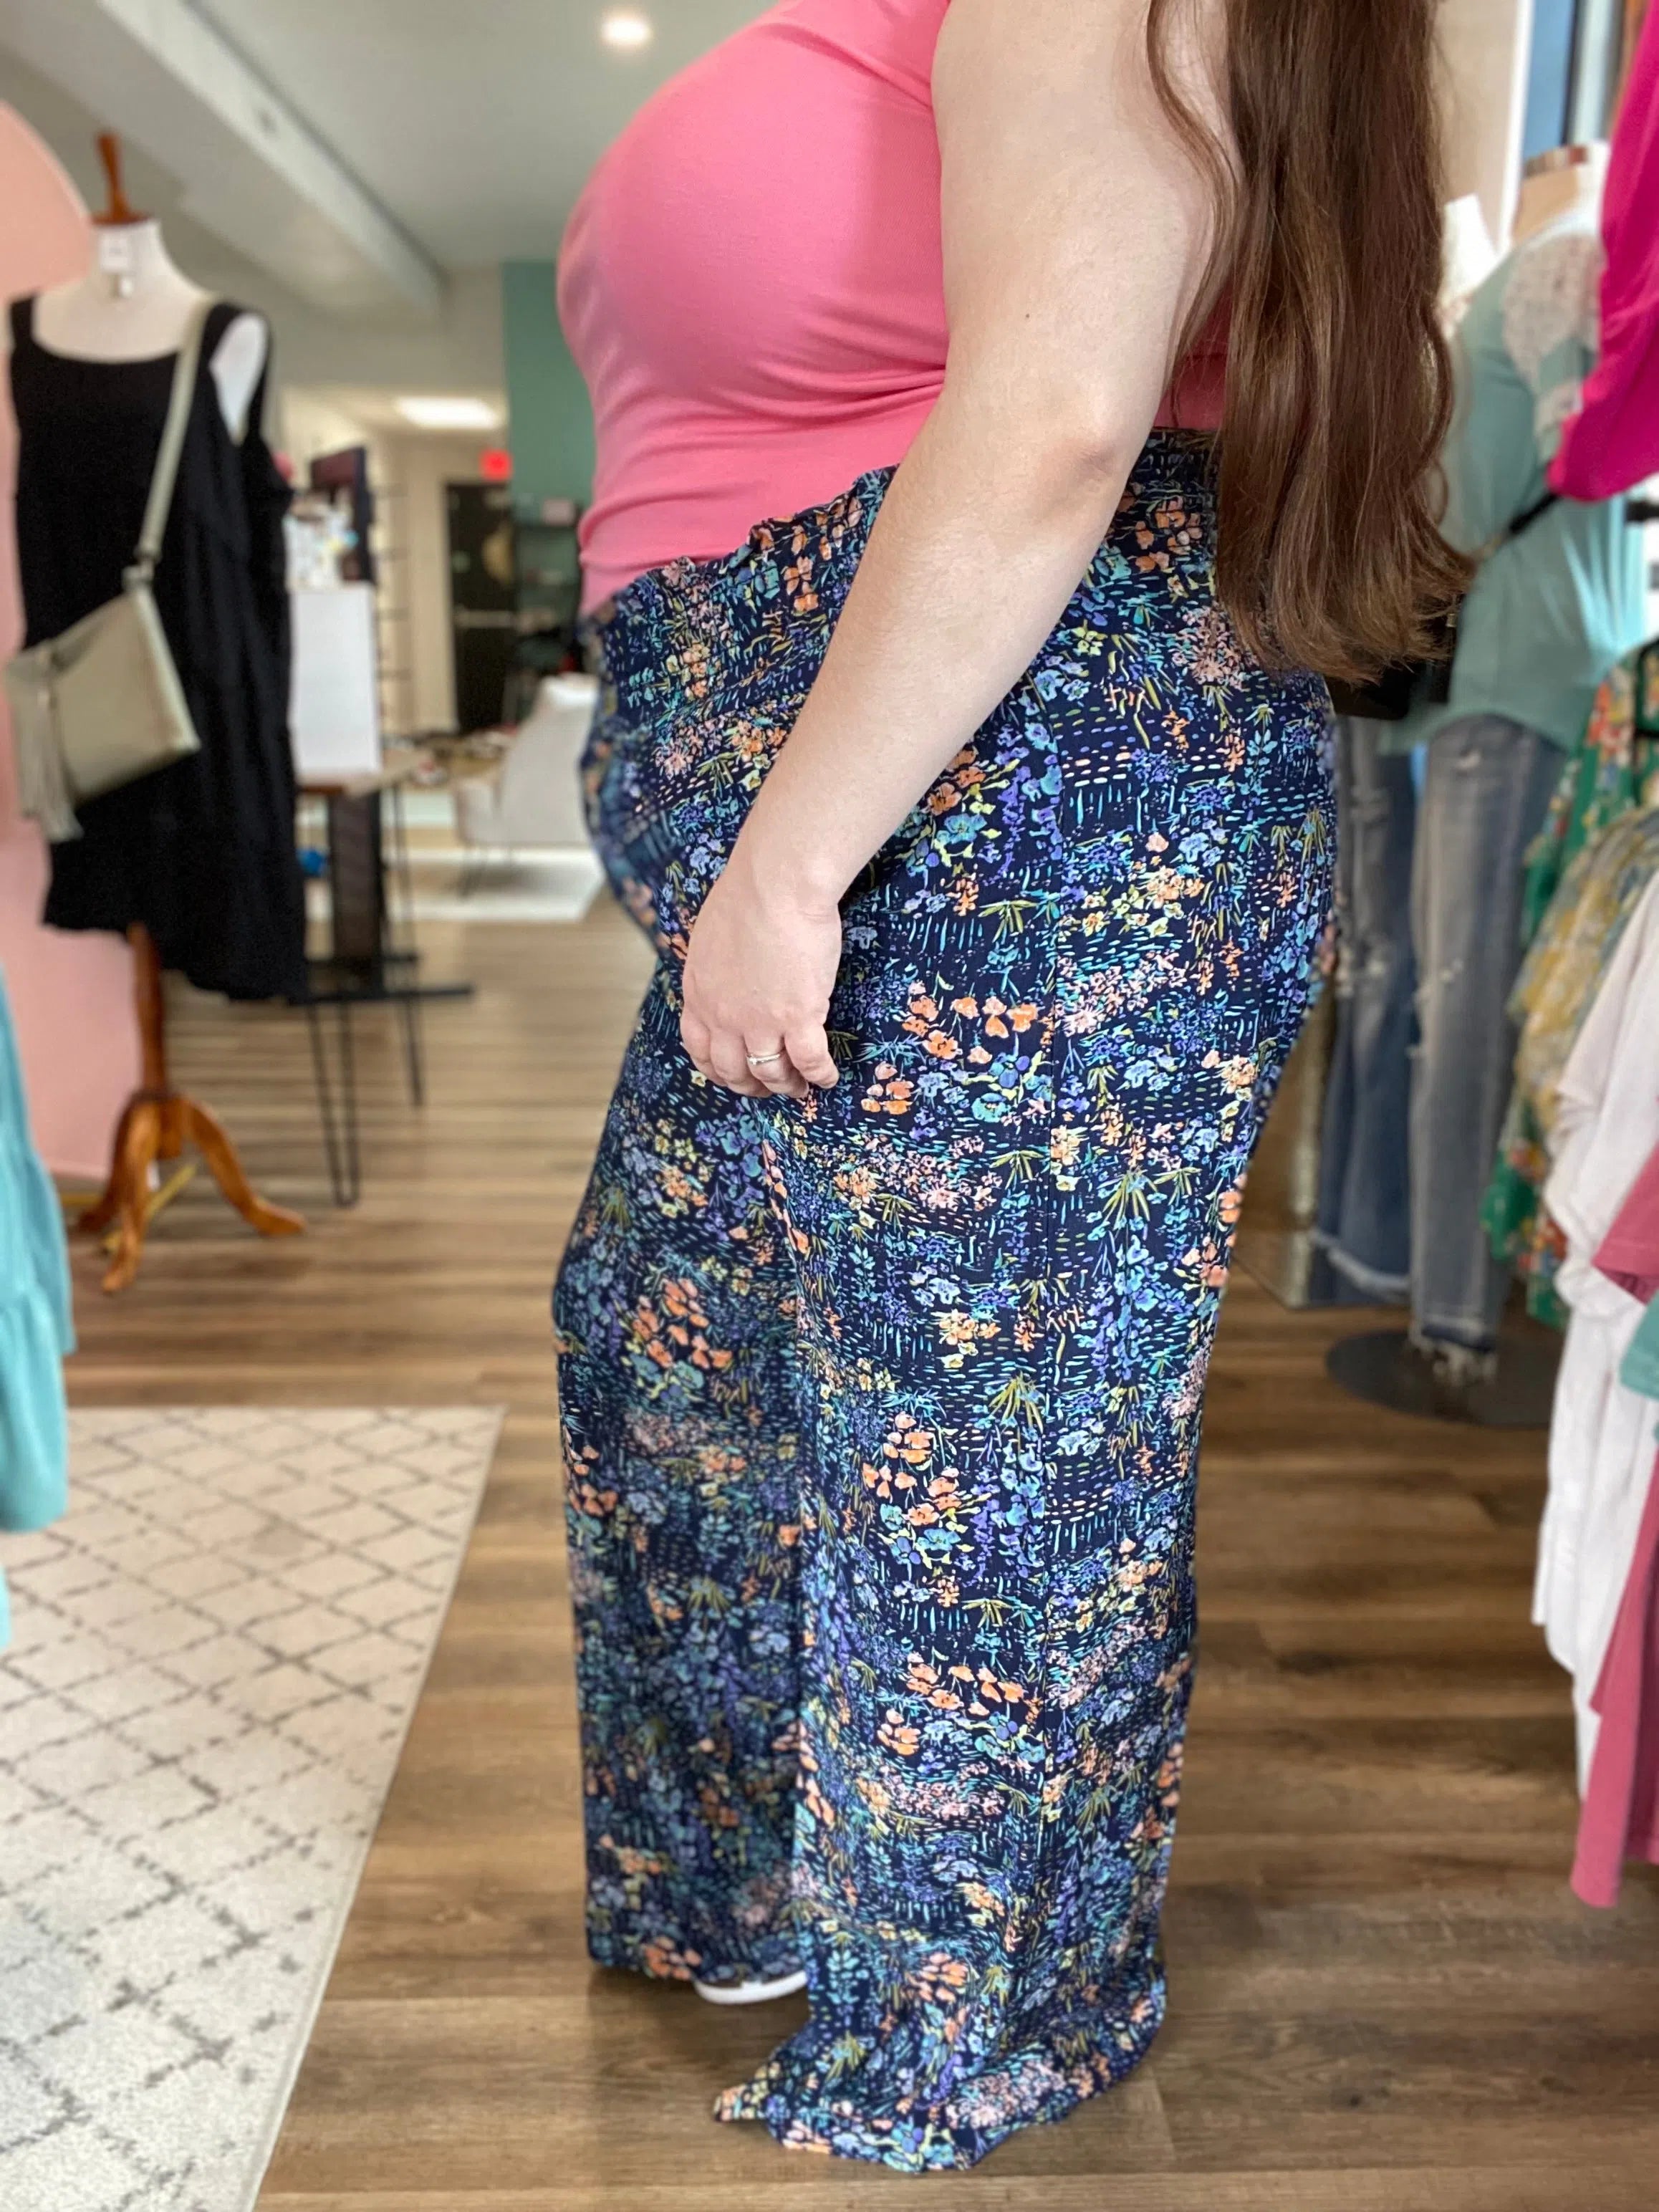 Shop Navy Floral Smocked Palazzo Pants-Pants at Ruby Joy Boutique, a Women's Clothing Store in Pickerington, Ohio